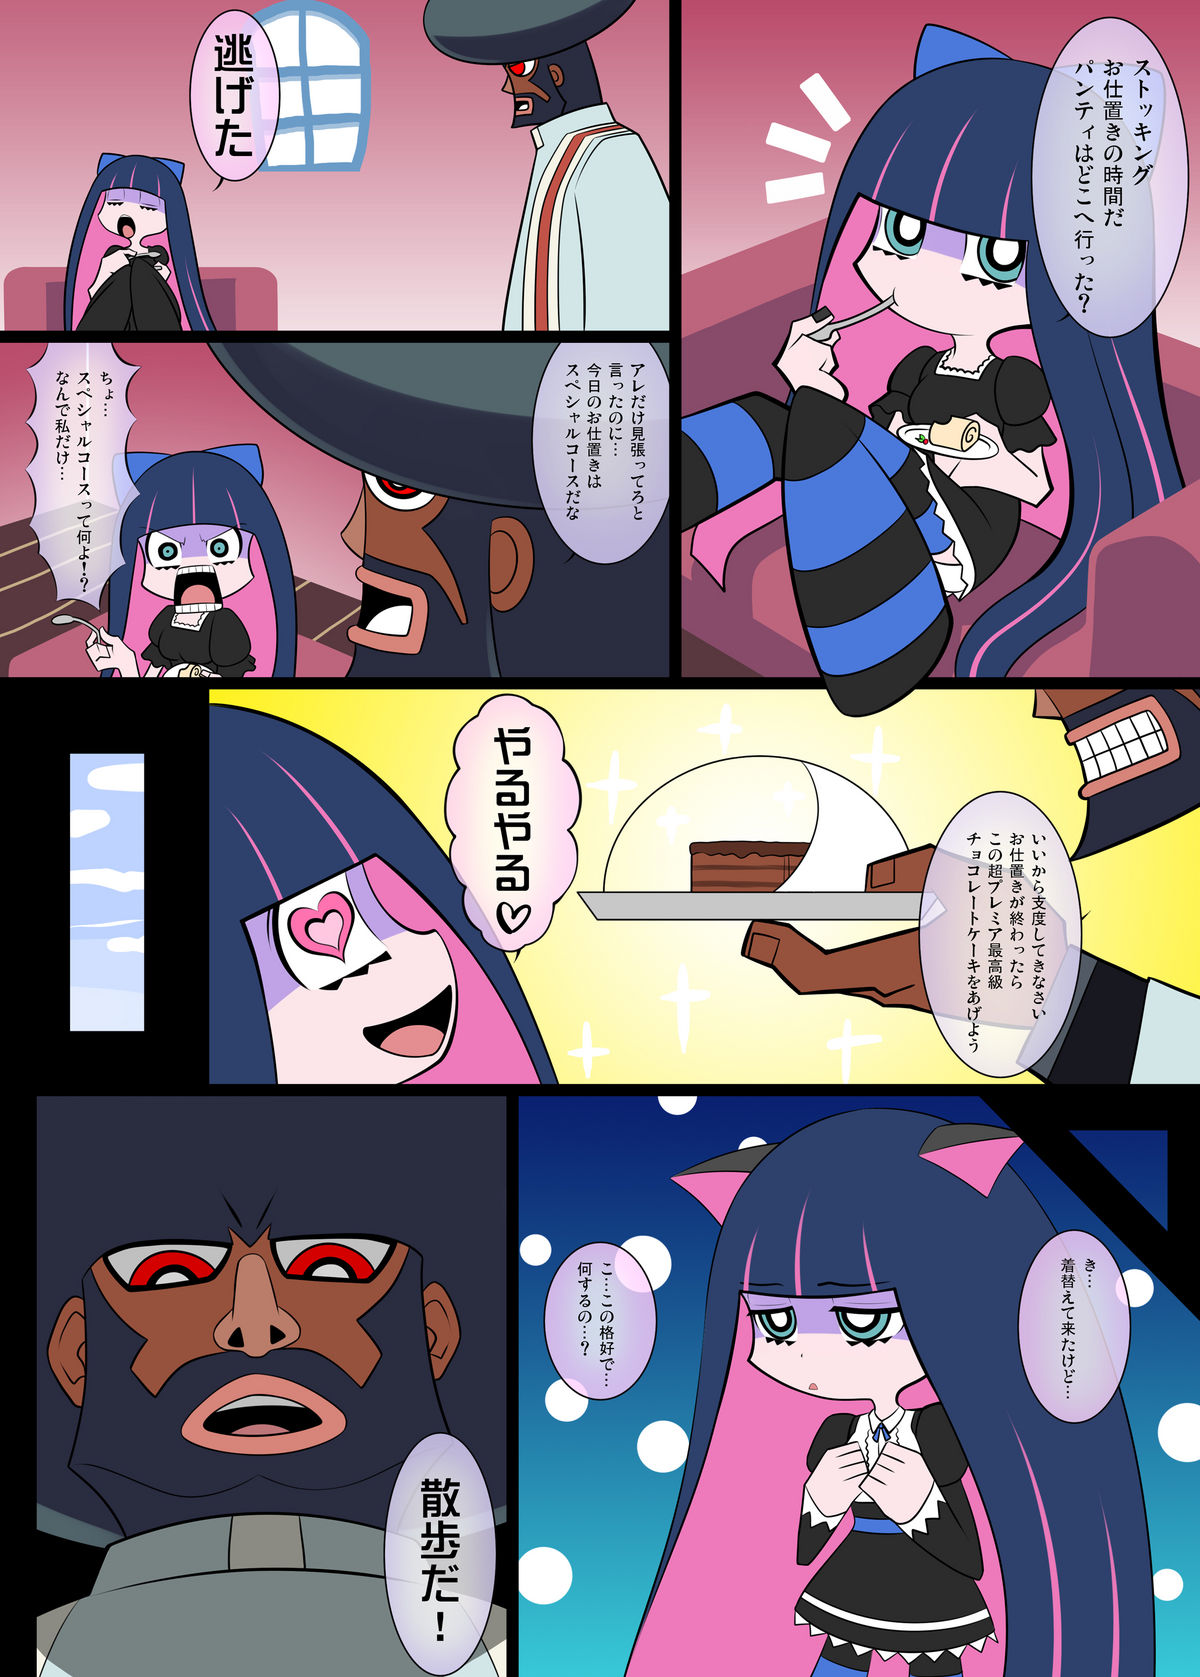 (C79) [Carrot Works (Hairaito)] Sperma &amp; Sweets with Villager (Panty &amp; Stocking with Garterbelt) (C79) [きゃろっとワークス (灰雷兎)] Sperma &amp; Sweets with Villager (パンティ&amp;ストッキング)